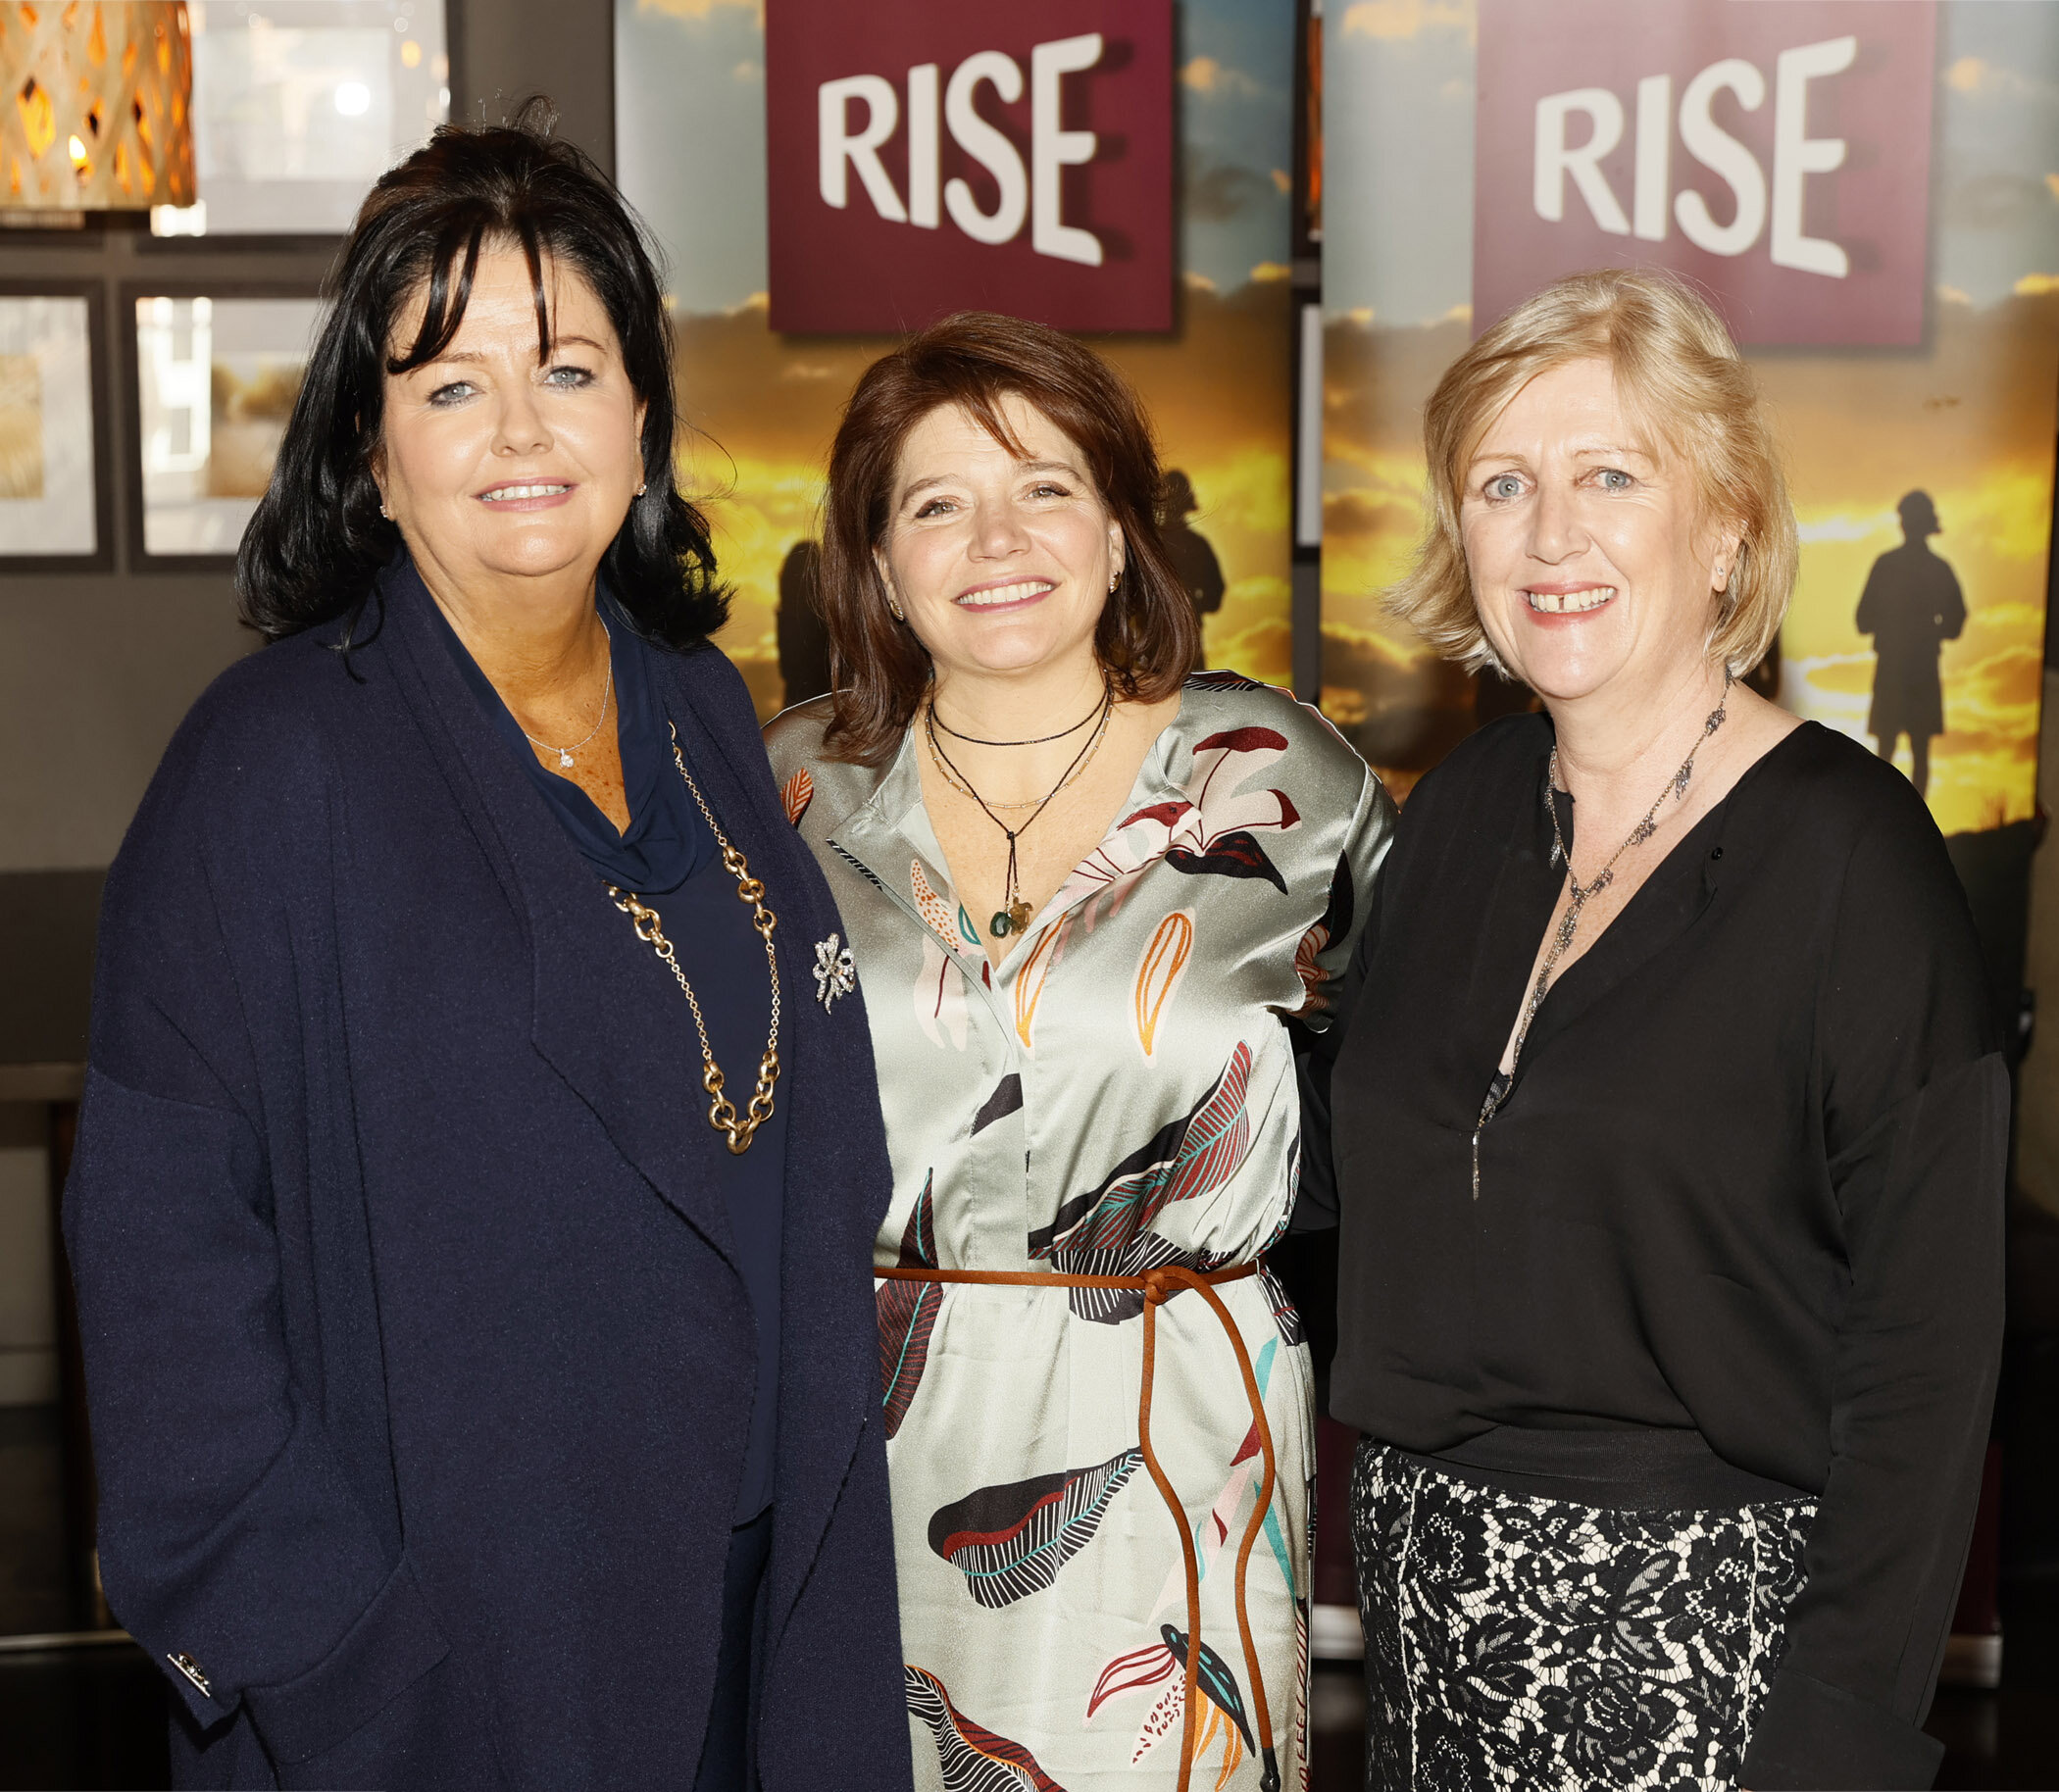 Angela O'Donnell, Danica Murphy and Niamh O'Mahony at the Friends of Rise inaugural lunch in aid of The RISE Foundation.jpg